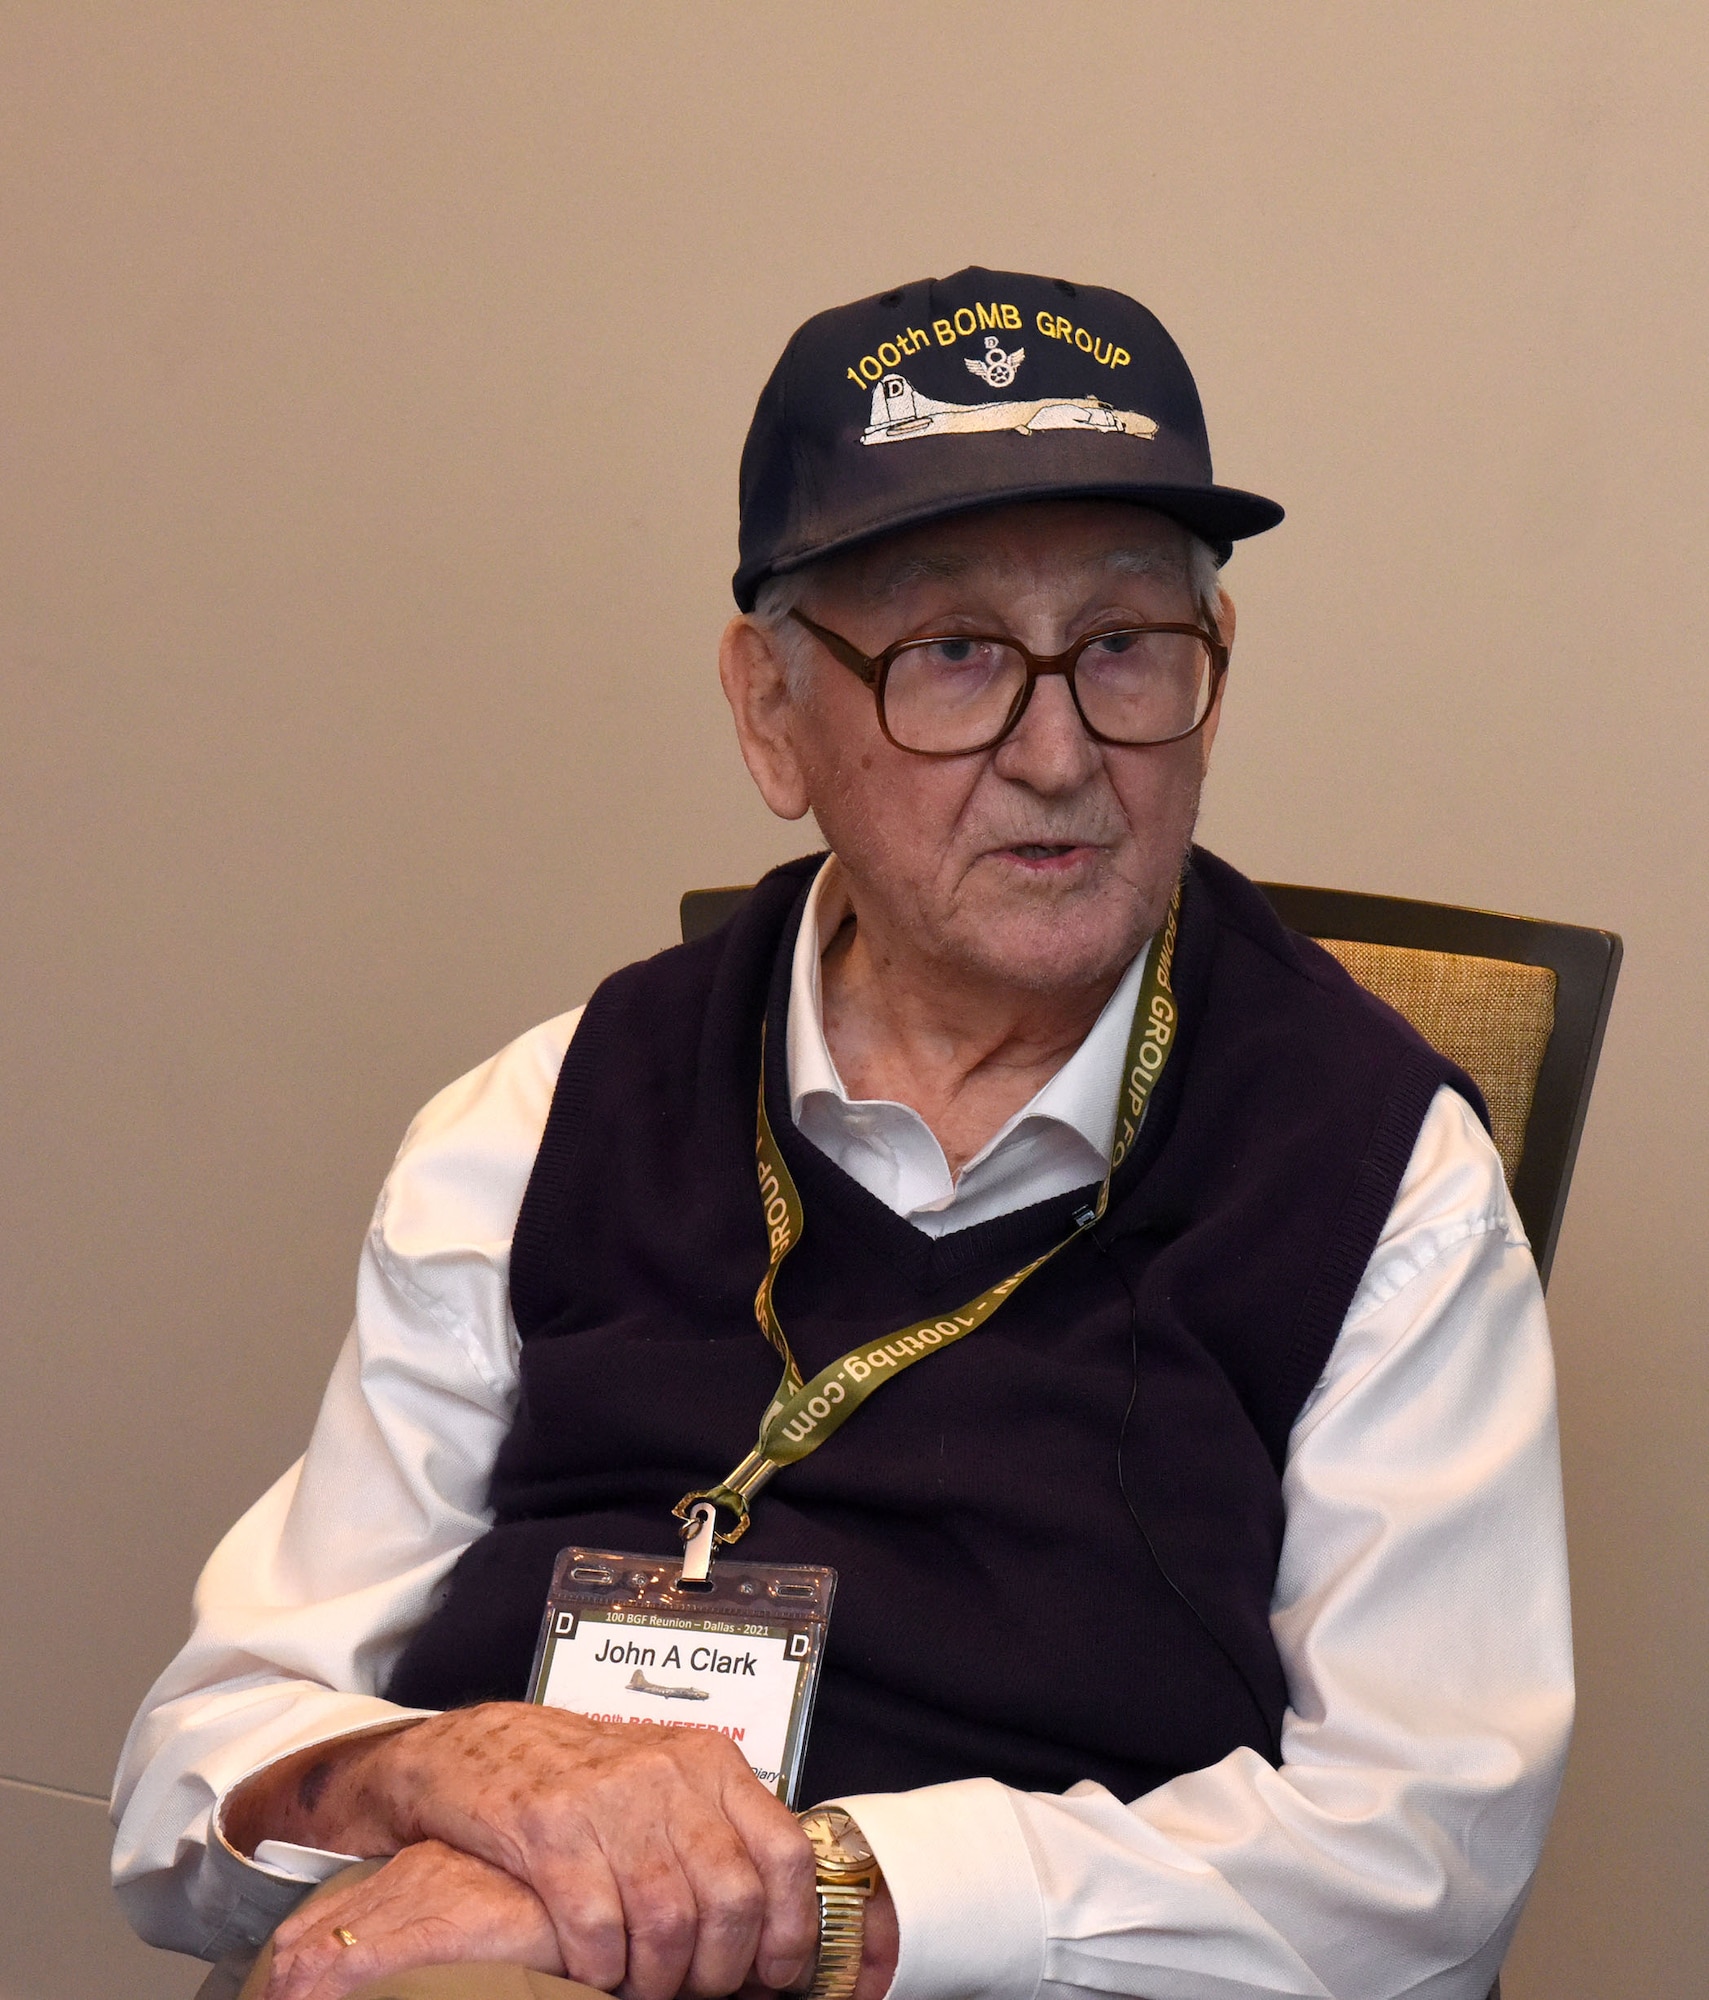 Retired 1st Lt. John A. Clark, 98, 100th Bomb Group veteran and World War II survivor, shares stories of his life before he served in the U.S. Army Air Corps during an interview at the 100th Bomb Group reunion in Dallas, Texas, Oct. 28, 2021. The reunion, held every other year in a different location around the U.S., brings together the few remaining survivors, their families, and Airmen from the 100th Air Refueling Wing at Royal Air Force Mildenhall, England. The 100th ARW takes its heritage and the infamous "Square D" from the 100th BG. (U.S. Air Force photo by Karen Abeyasekere)